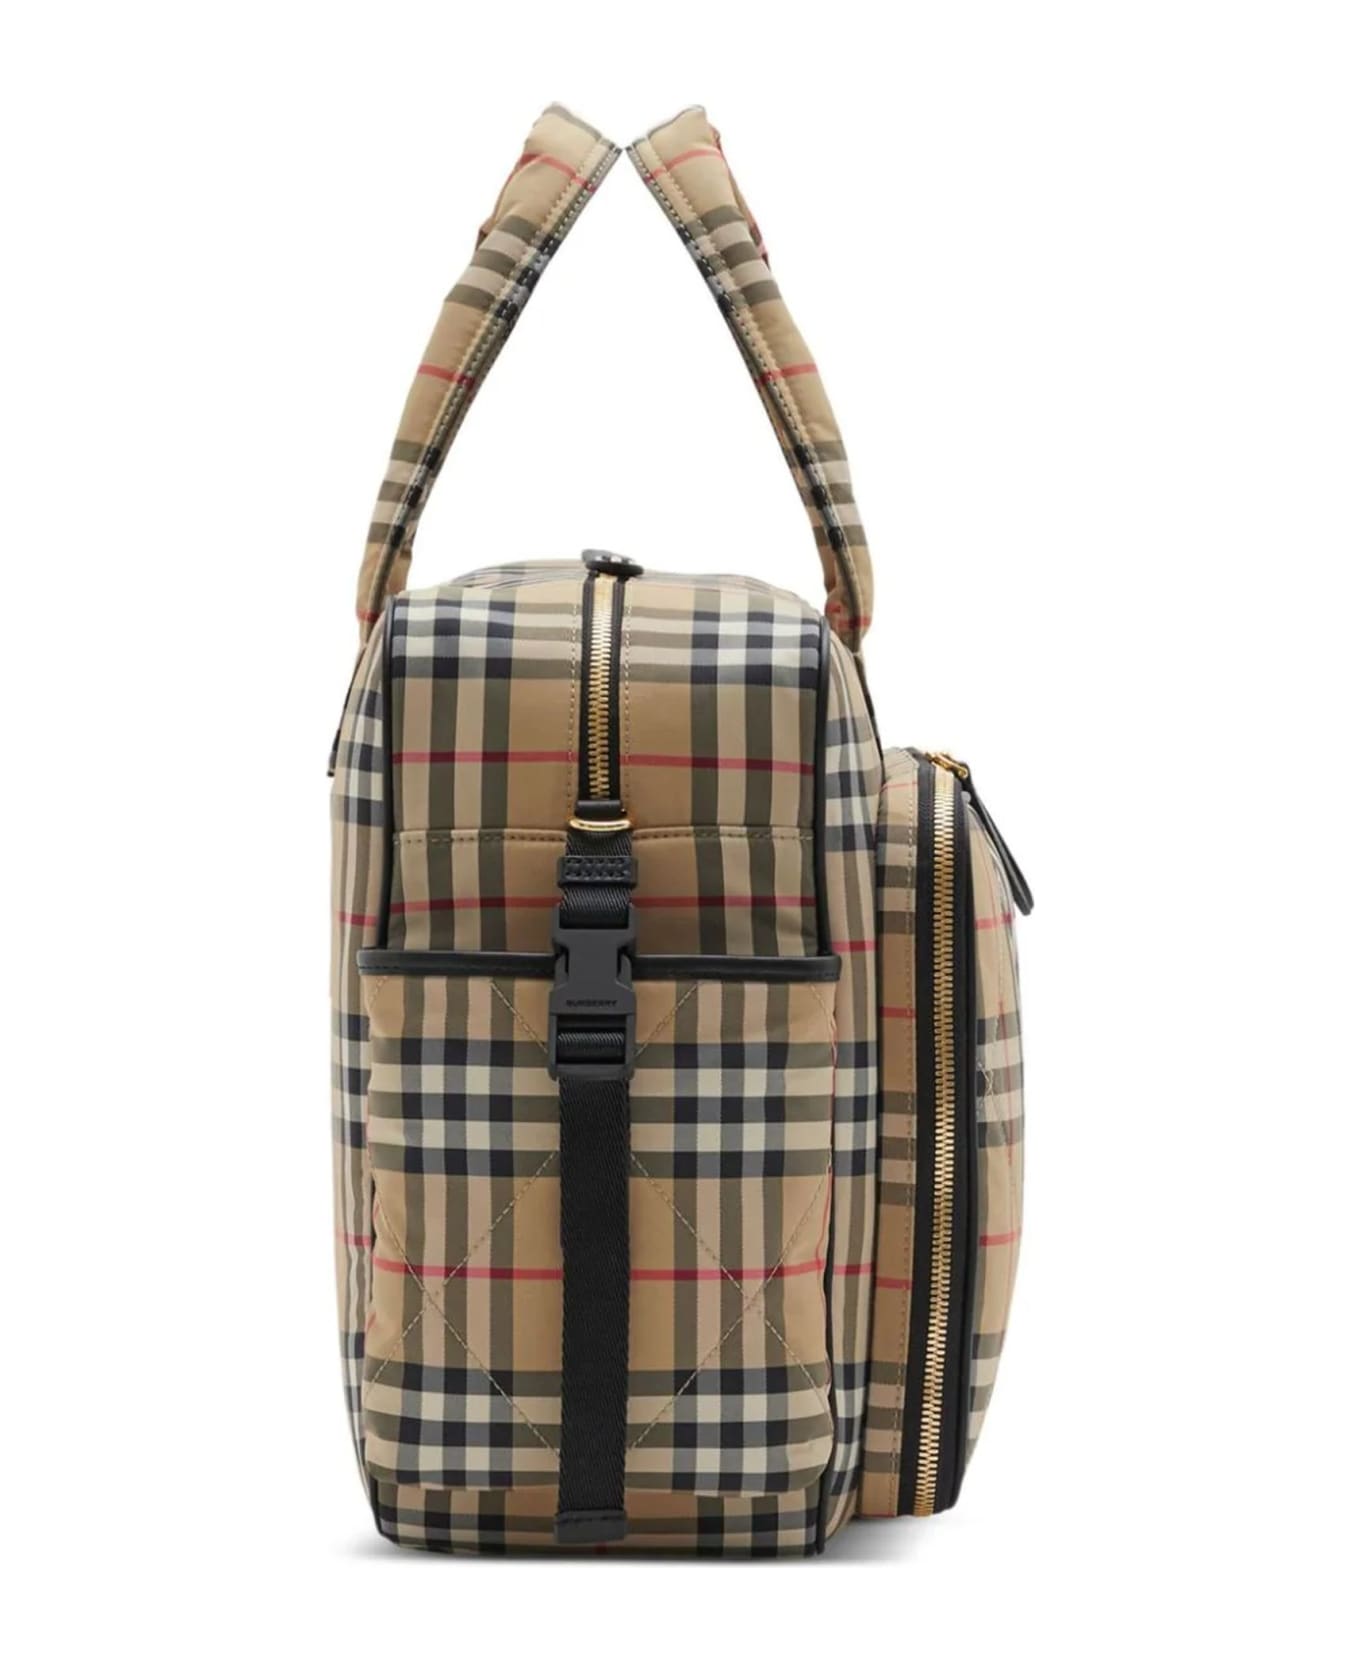 Burberry Check Polyamide Changing Bag - Archive beige chk アクセサリー＆ギフト